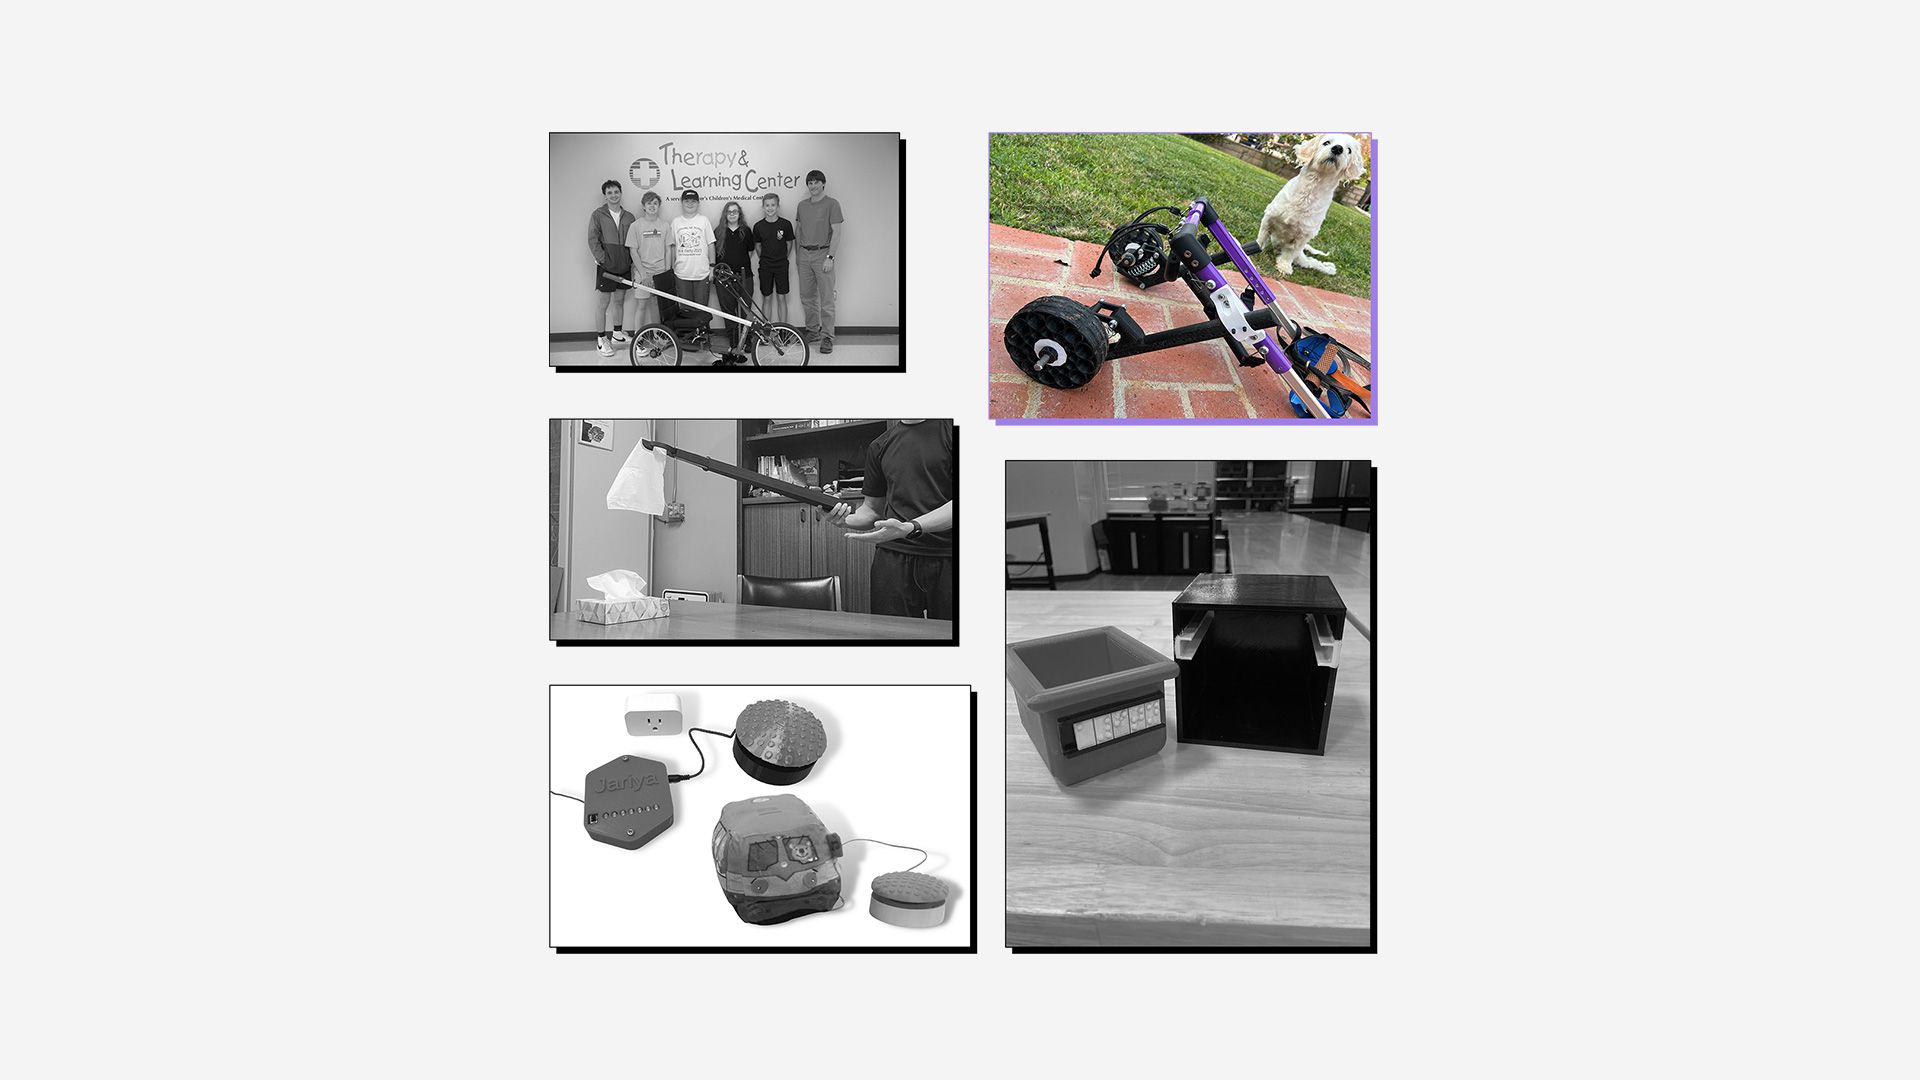 Collage of 3D printed assistive devices with winning entry (dog wheelchair) highlighted.